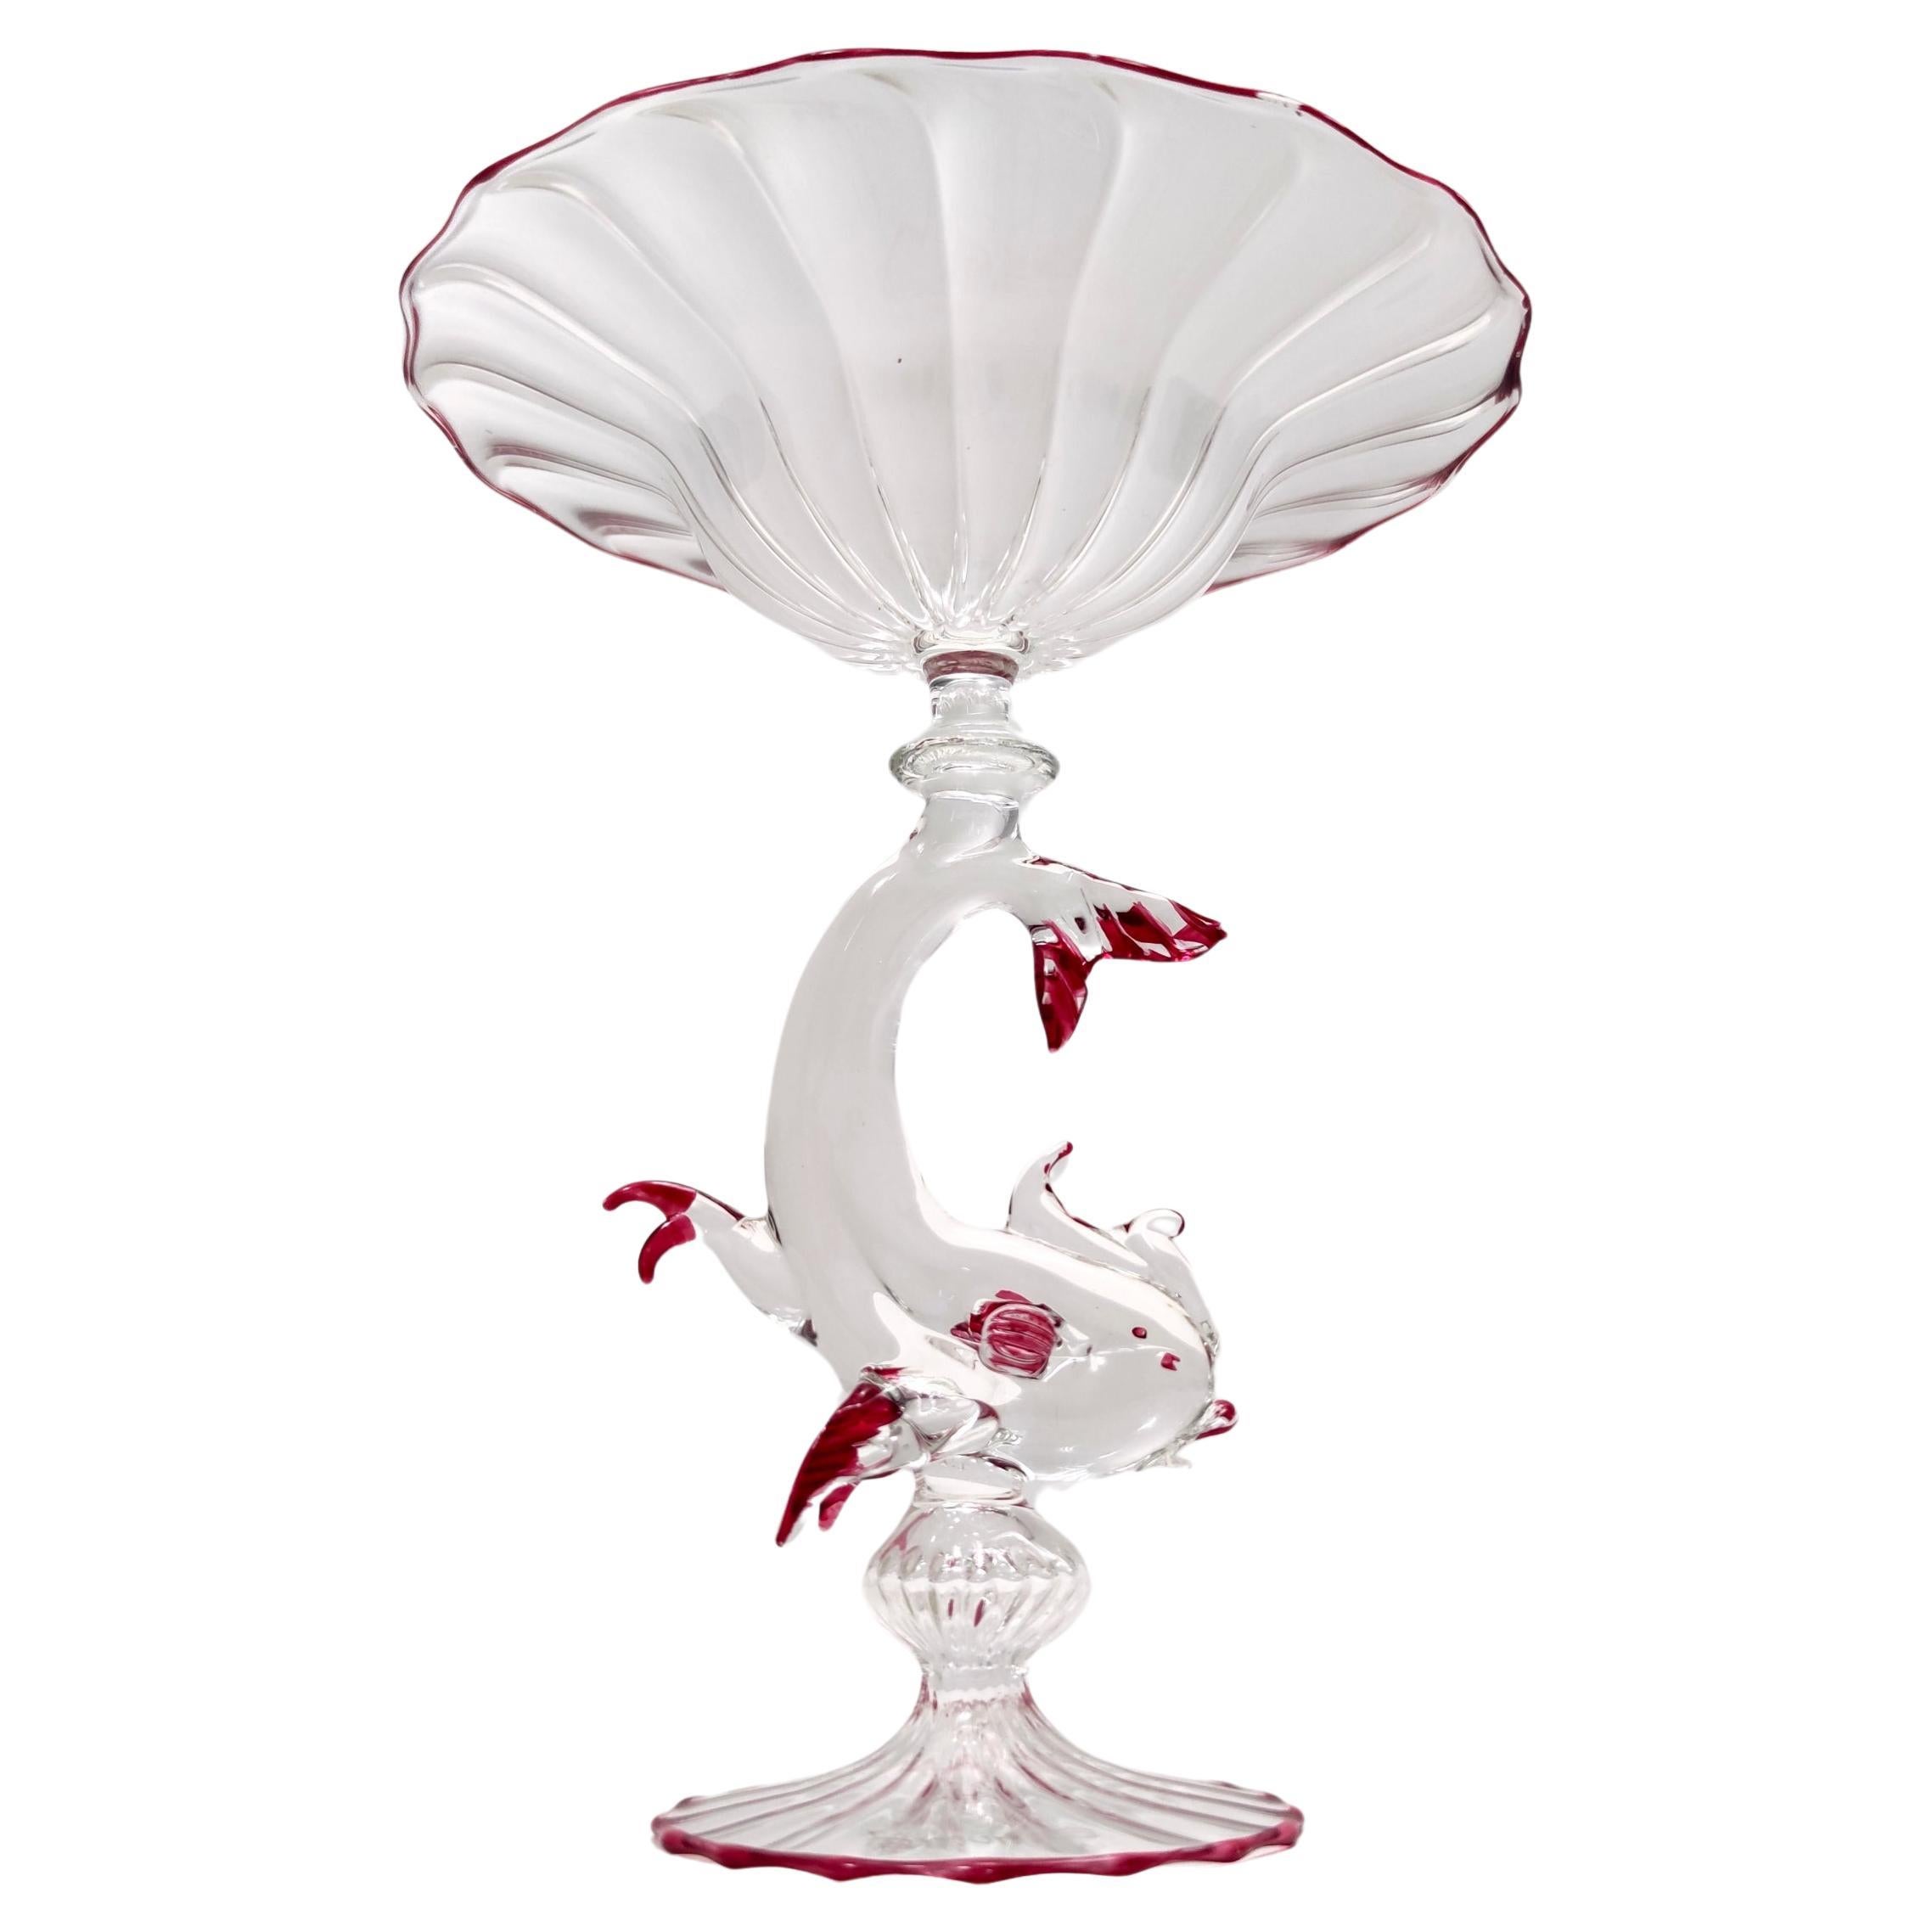 Made in Italy, 1970s - 1980s. 
This cake stand / pedestal bowl is made in Murano glass and features a fish-shaped stem. 
It is signed by La Murrina. 
This is a vintage piece, therefore it might show slight traces of use, but it can be considered as